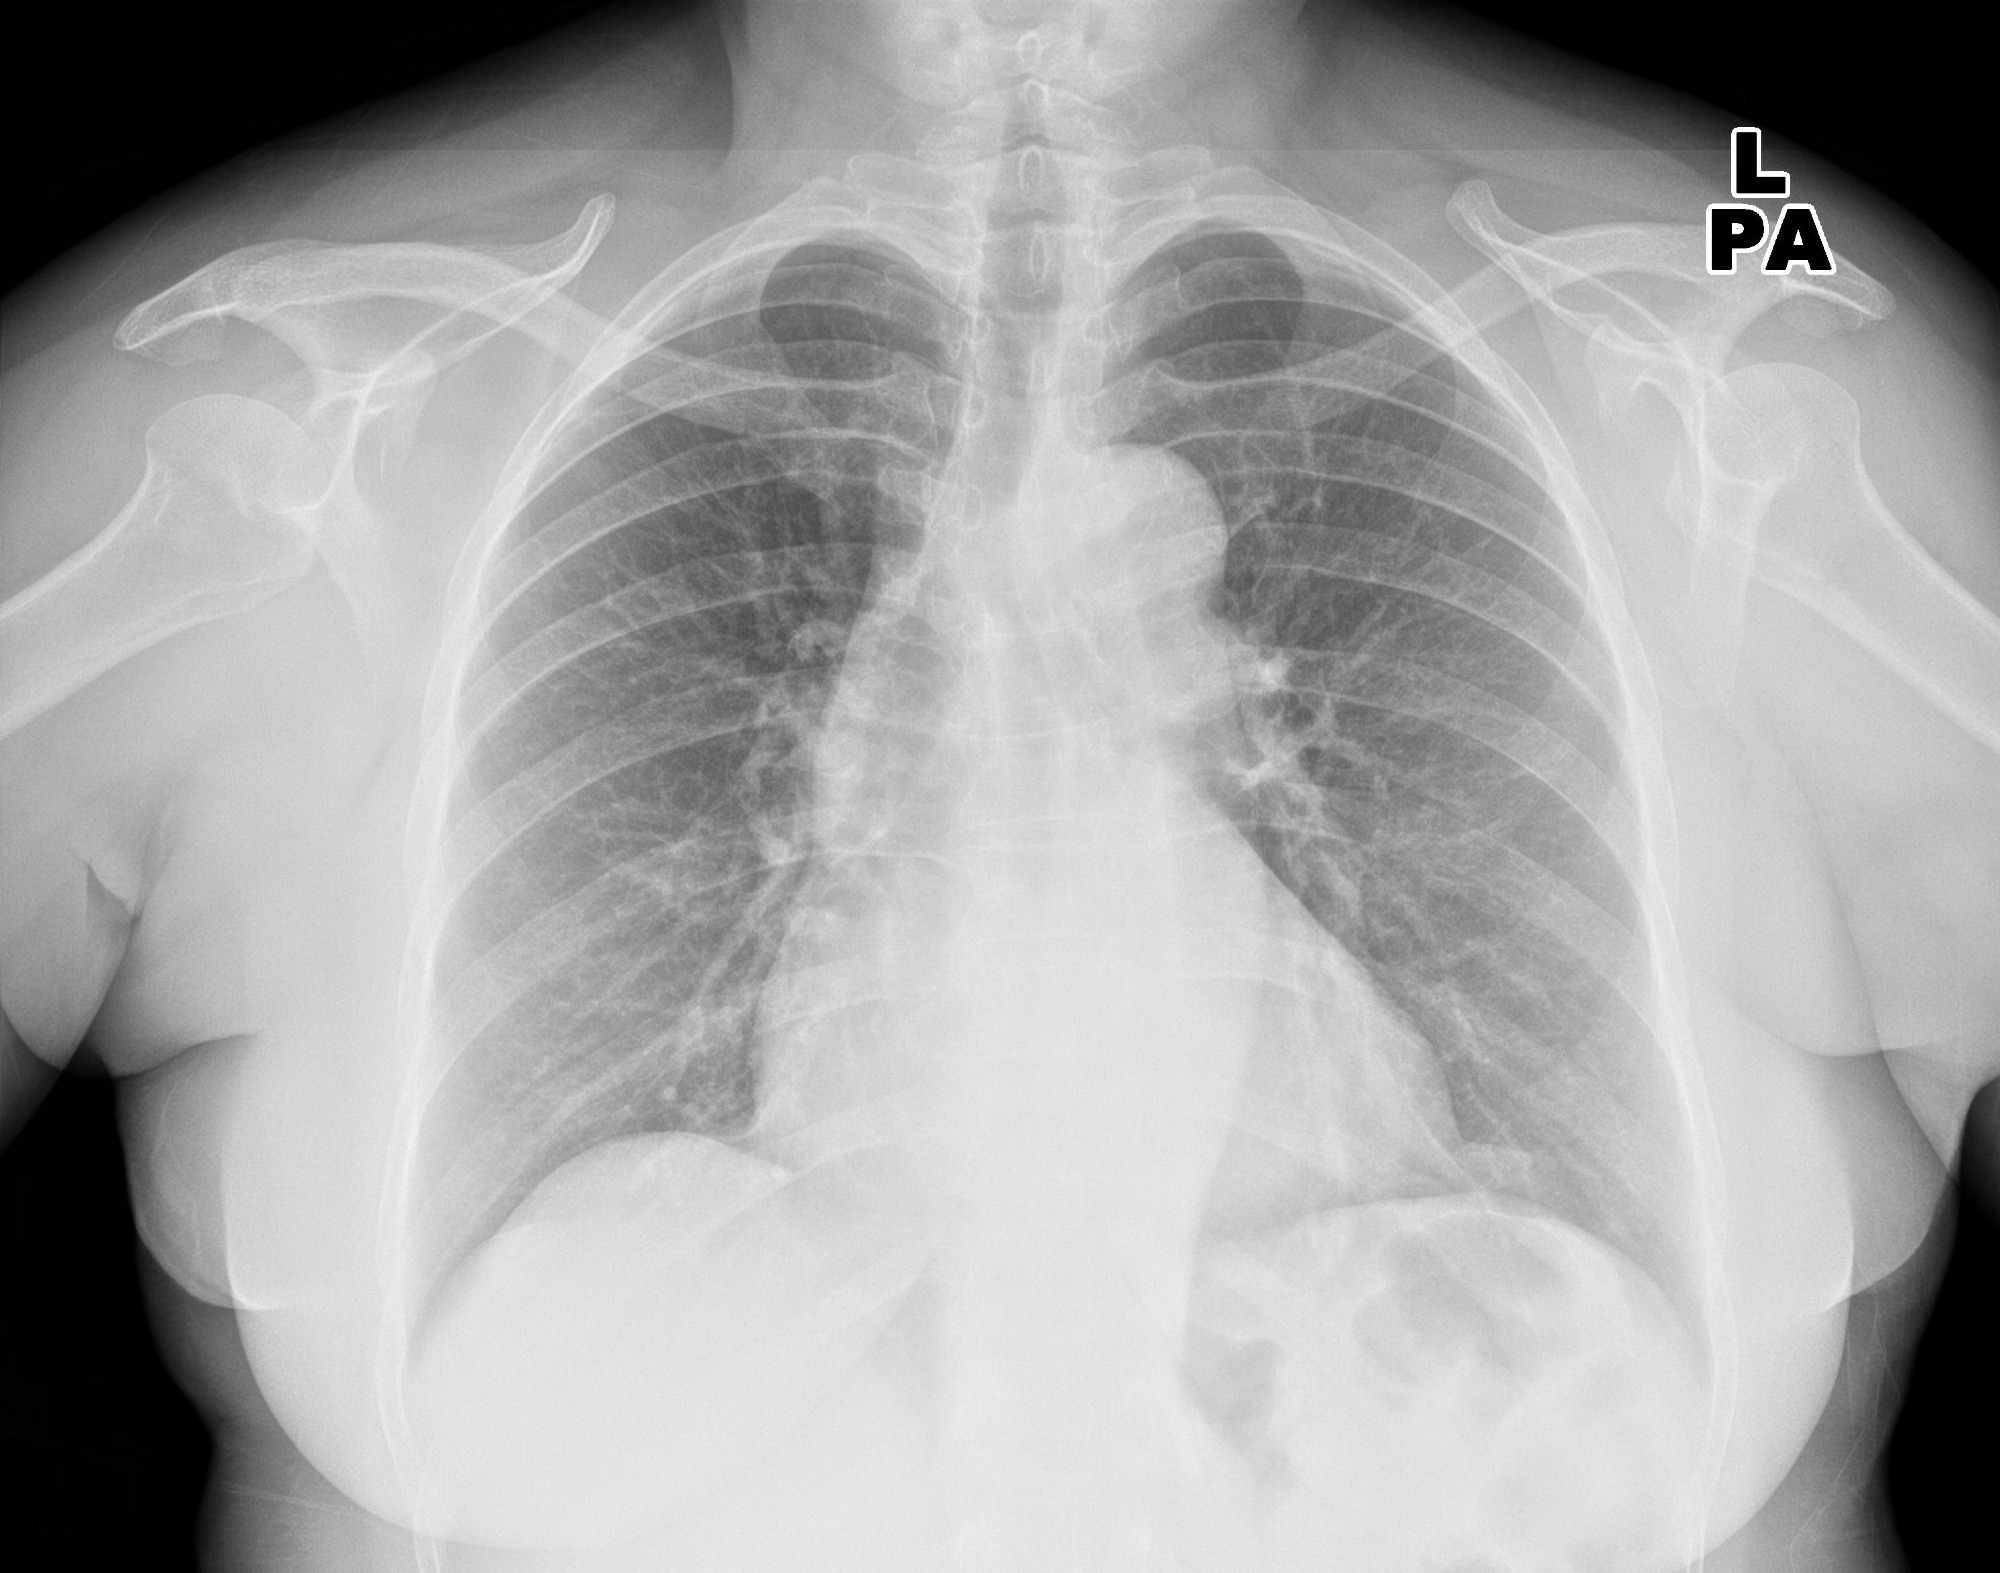 Study: Commercially Available Chest Radiograph AI Tools for Detecting Airspace Disease, Pneumothorax, and Pleural Effusion. Image Credit: KELECHI5050 / Shutterstock